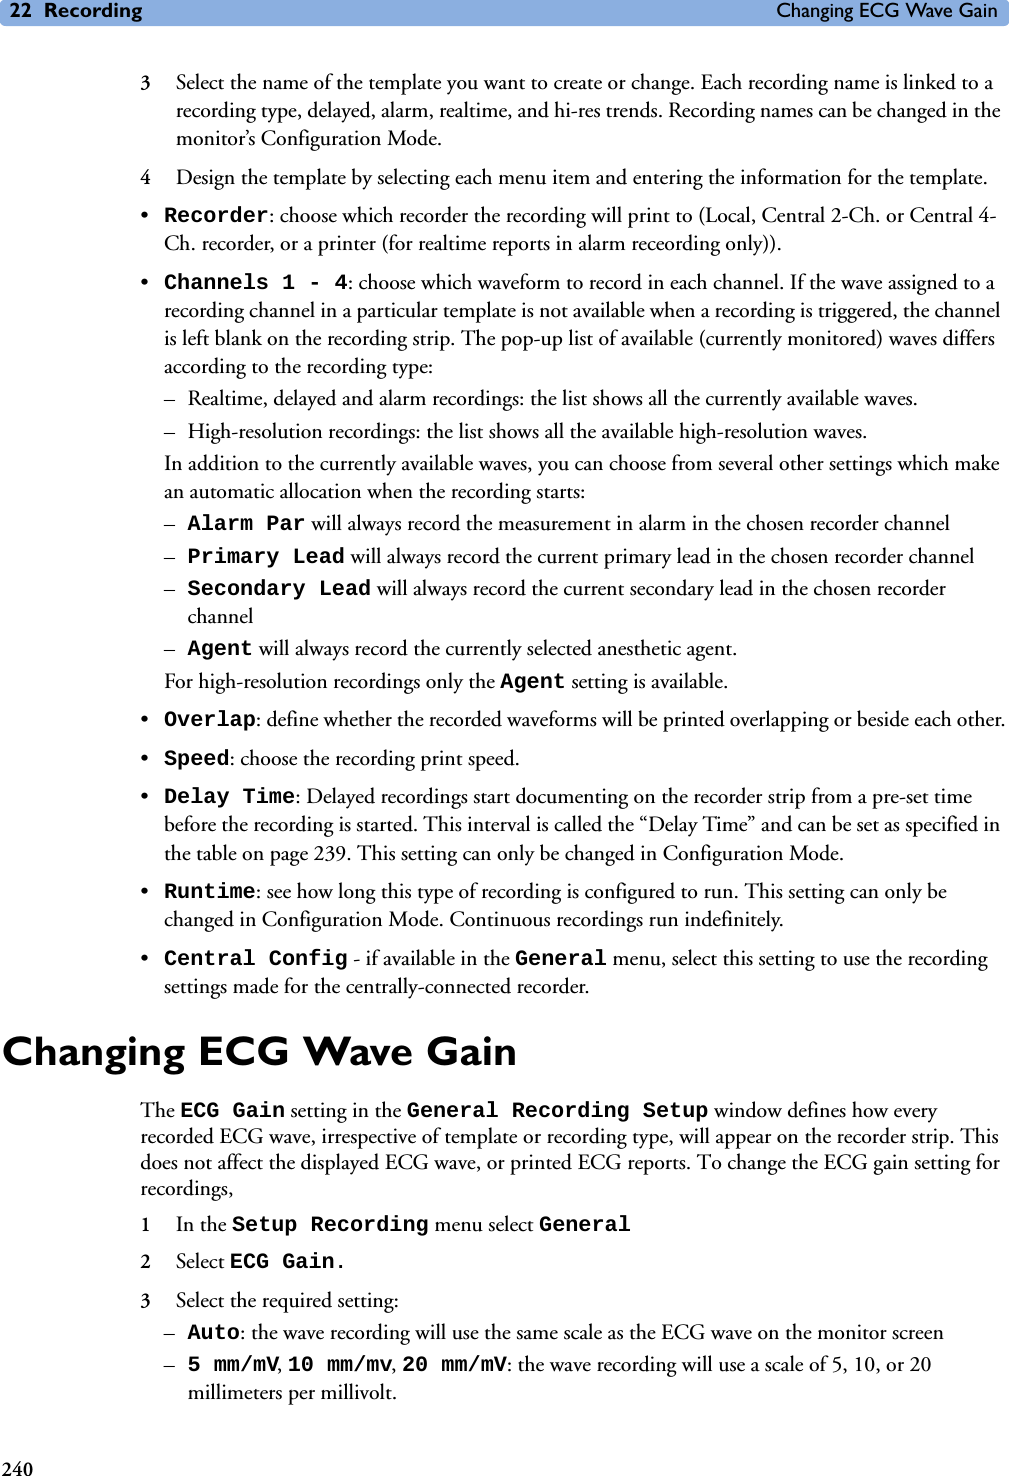 22 Recording Changing ECG Wave Gain2403Select the name of the template you want to create or change. Each recording name is linked to a recording type, delayed, alarm, realtime, and hi-res trends. Recording names can be changed in the monitor’s Configuration Mode.4Design the template by selecting each menu item and entering the information for the template. •Recorder: choose which recorder the recording will print to (Local, Central 2-Ch. or Central 4-Ch. recorder, or a printer (for realtime reports in alarm receording only)). •Channels 1 - 4: choose which waveform to record in each channel. If the wave assigned to a recording channel in a particular template is not available when a recording is triggered, the channel is left blank on the recording strip. The pop-up list of available (currently monitored) waves differs according to the recording type: – Realtime, delayed and alarm recordings: the list shows all the currently available waves. – High-resolution recordings: the list shows all the available high-resolution waves.In addition to the currently available waves, you can choose from several other settings which make an automatic allocation when the recording starts:–Alarm Par will always record the measurement in alarm in the chosen recorder channel–Primary Lead will always record the current primary lead in the chosen recorder channel–Secondary Lead will always record the current secondary lead in the chosen recorder channel–Agent will always record the currently selected anesthetic agent.For high-resolution recordings only the Agent setting is available.•Overlap: define whether the recorded waveforms will be printed overlapping or beside each other.•Speed: choose the recording print speed.•Delay Time: Delayed recordings start documenting on the recorder strip from a pre-set time before the recording is started. This interval is called the “Delay Time” and can be set as specified in the table on page 239. This setting can only be changed in Configuration Mode.•Runtime: see how long this type of recording is configured to run. This setting can only be changed in Configuration Mode. Continuous recordings run indefinitely.•Central Config - if available in the General menu, select this setting to use the recording settings made for the centrally-connected recorder.Changing ECG Wave GainThe ECG Gain setting in the General Recording Setup window defines how every recorded ECG wave, irrespective of template or recording type, will appear on the recorder strip. This does not affect the displayed ECG wave, or printed ECG reports. To change the ECG gain setting for recordings, 1In the Setup Recording menu select General 2Select ECG Gain.3Select the required setting:–Auto: the wave recording will use the same scale as the ECG wave on the monitor screen–5 mm/mV, 10 mm/mv, 20 mm/mV: the wave recording will use a scale of 5, 10, or 20 millimeters per millivolt.